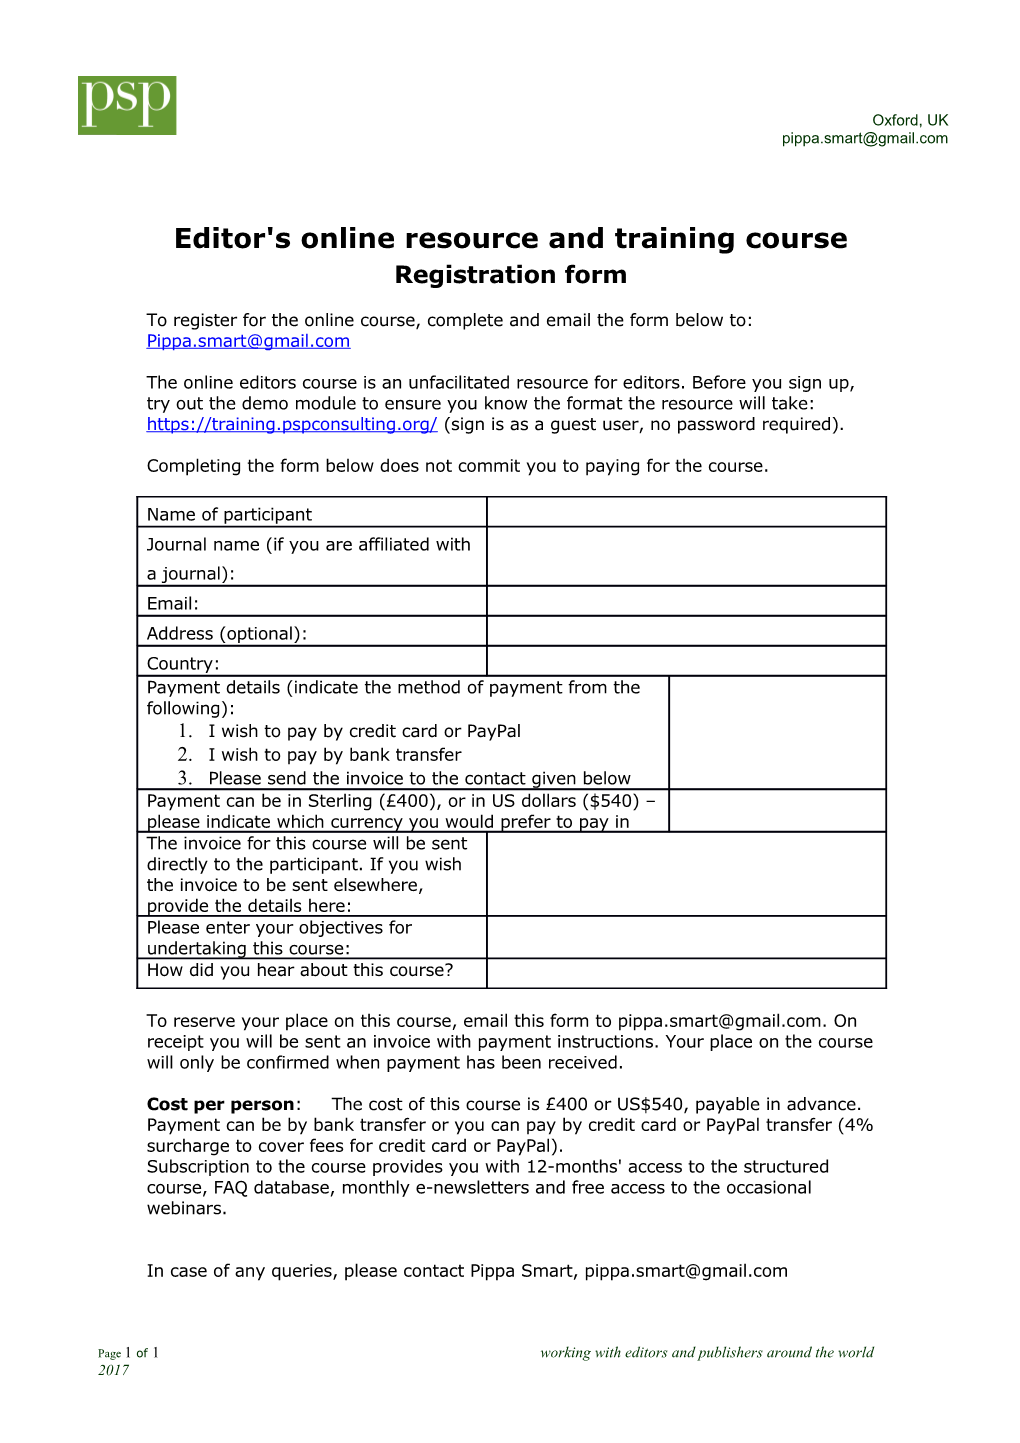 Editor's Online Resource and Training Course